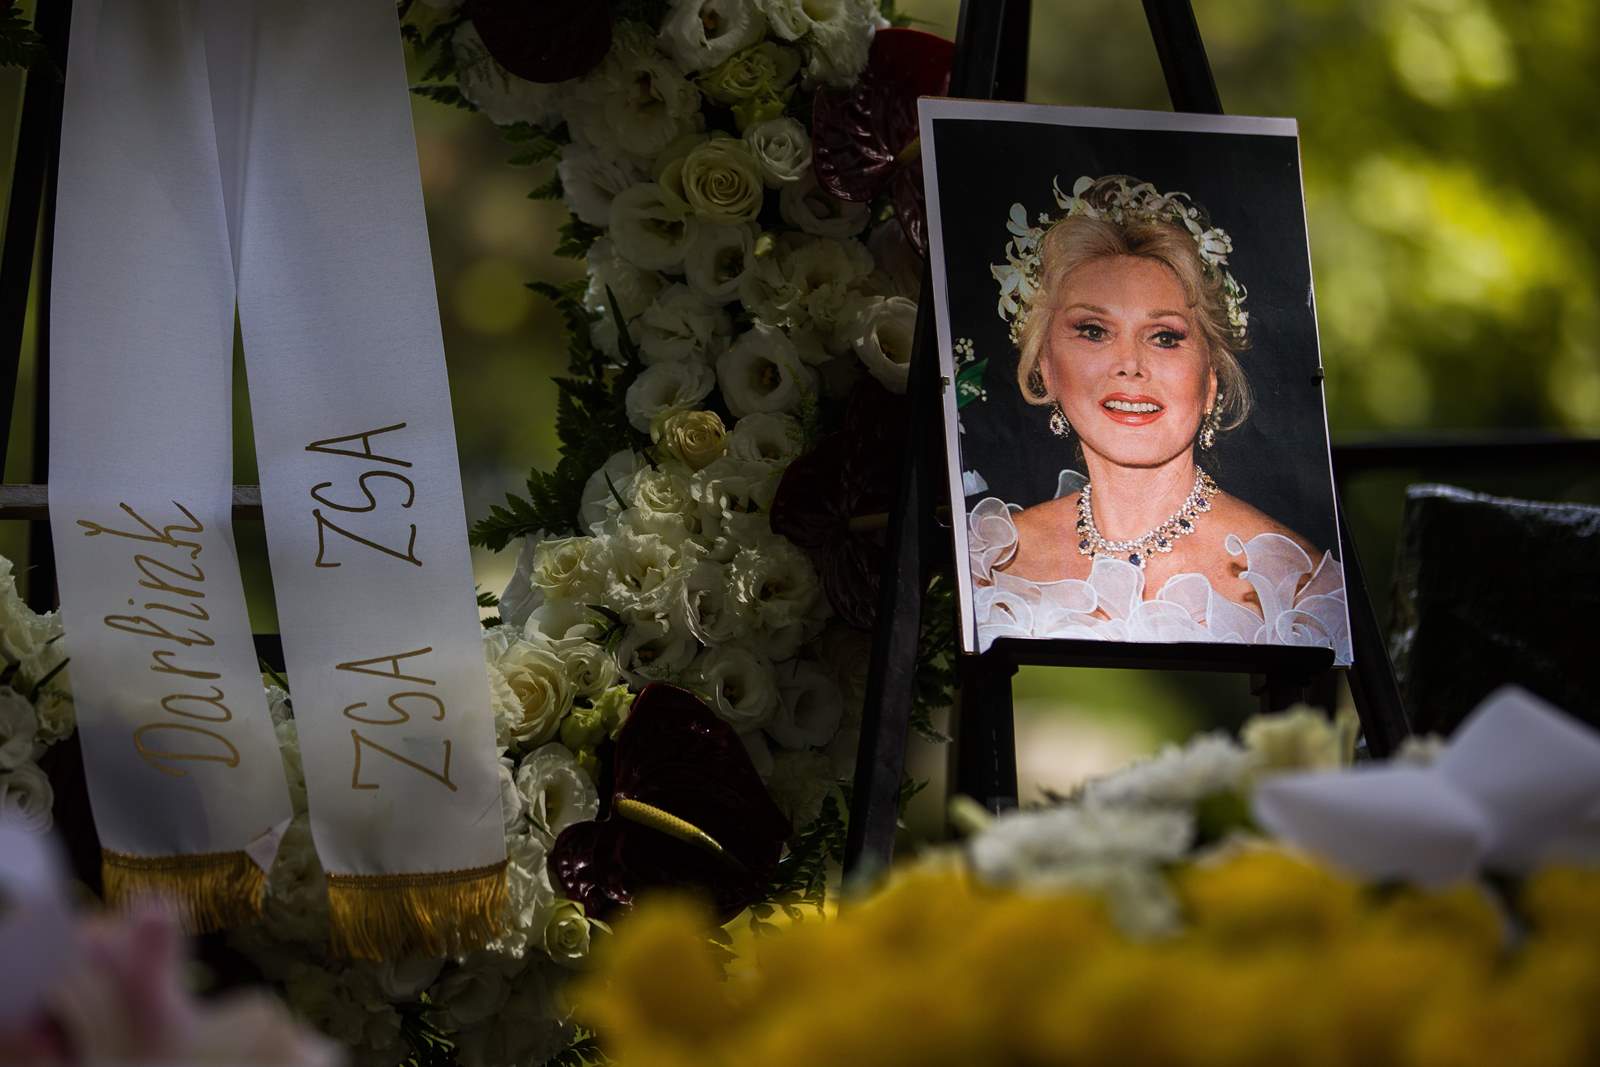 The ashes of Zsazsa Gábor were laid to rest on Tuesday in the Fiumei Street graveyard in Budapest, almost five years after her death.